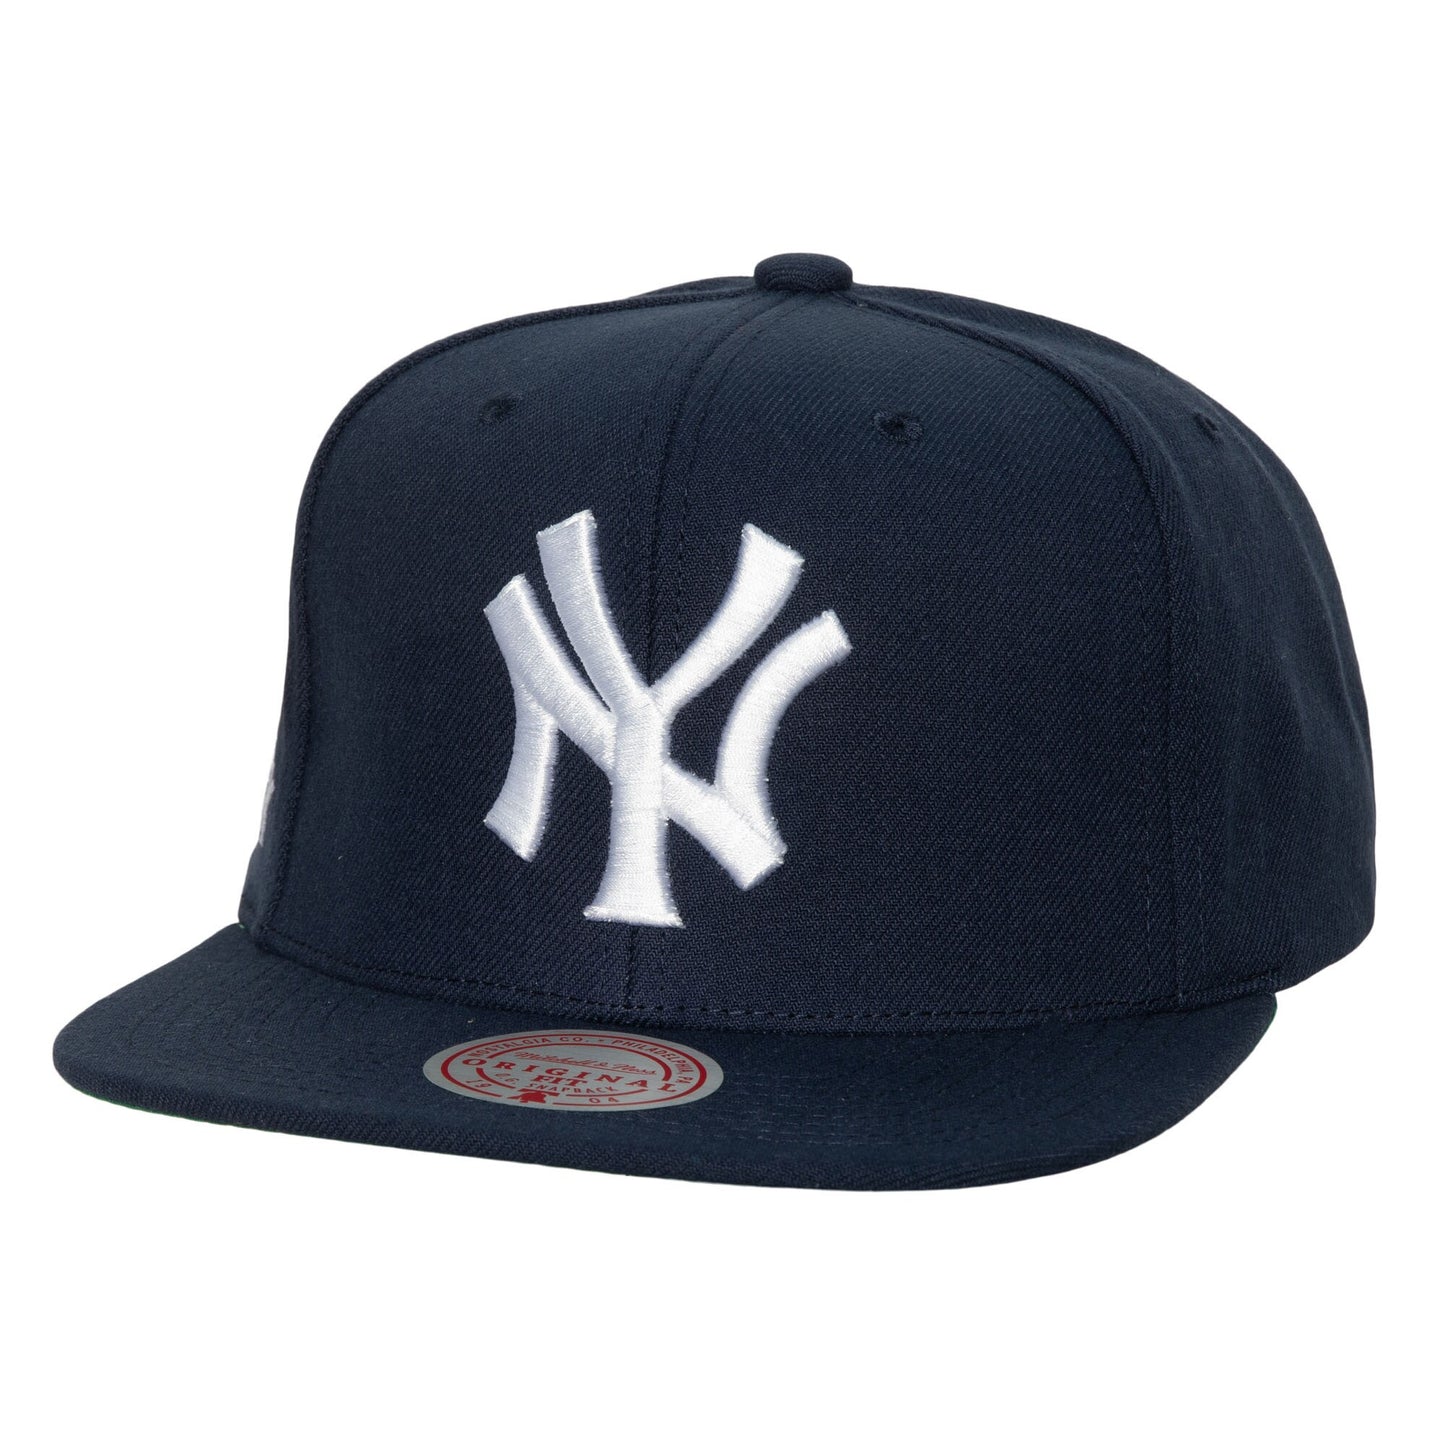 New York Yankees Mitchell & Ness Cooperstown Collection Evergreen Snapback Hat - Navy